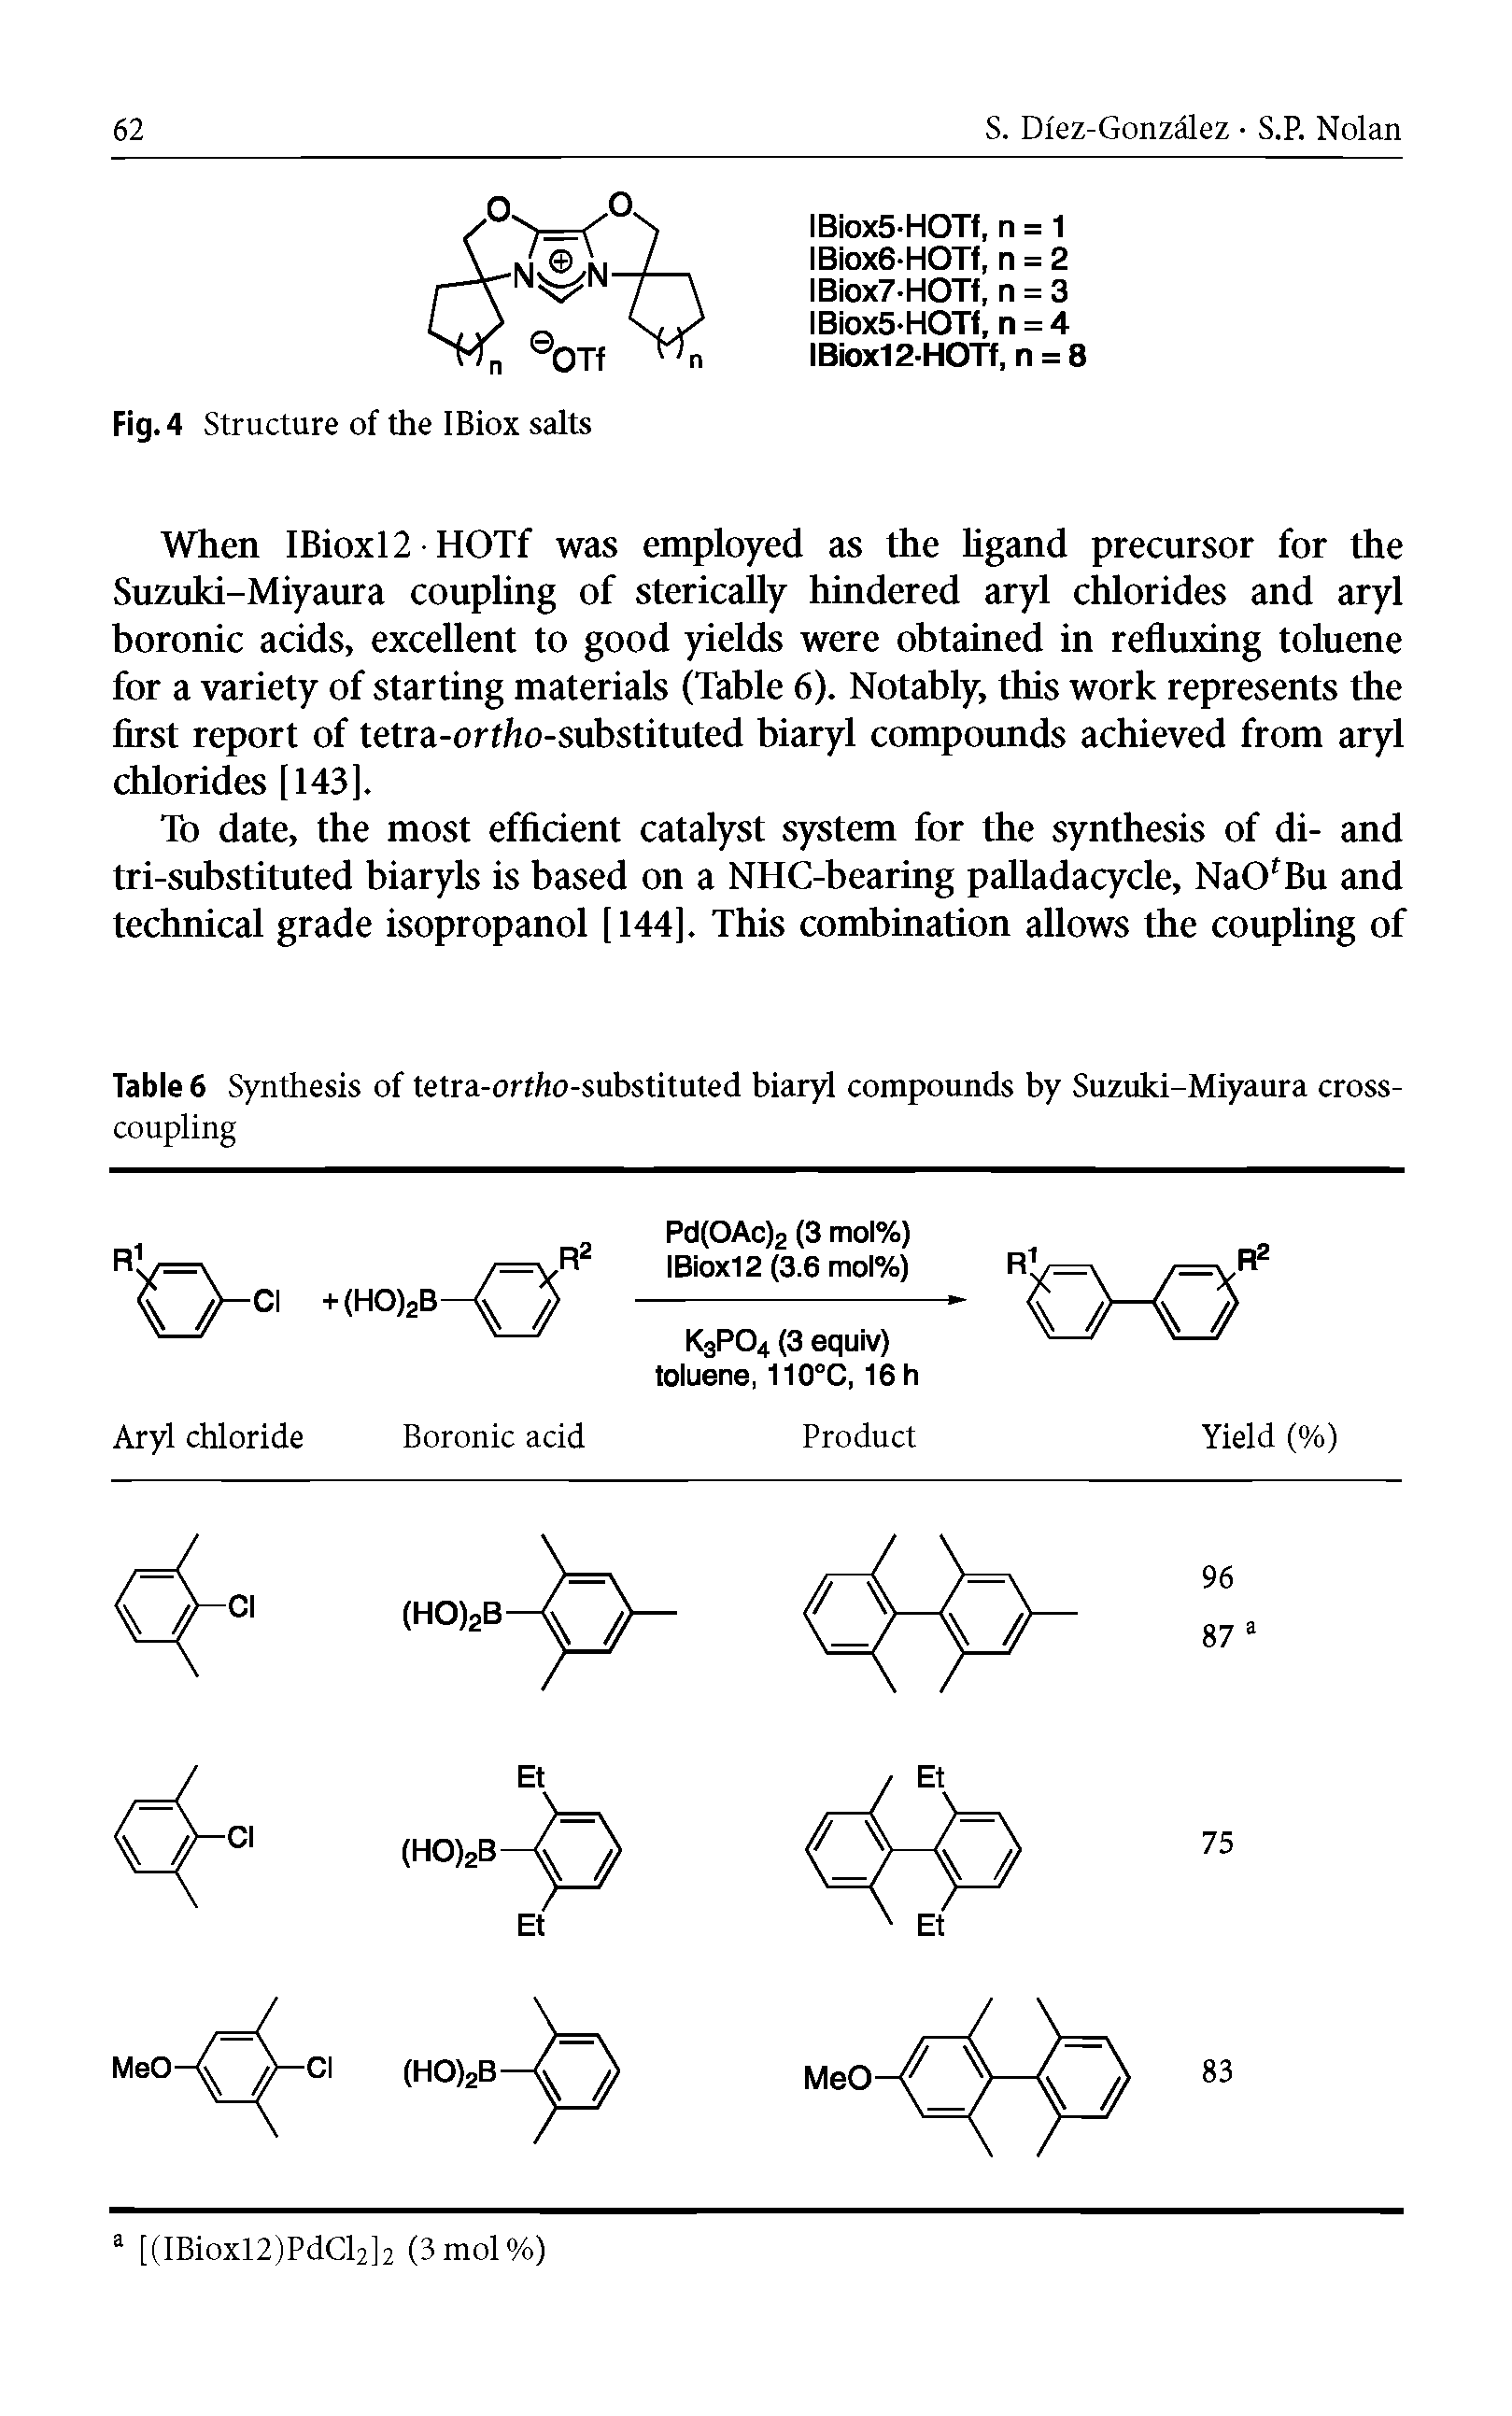 Table 6 Synthesis of tetra-orf/io-substituted biaryl compounds by Suzuki-Miyaura crosscoupling...